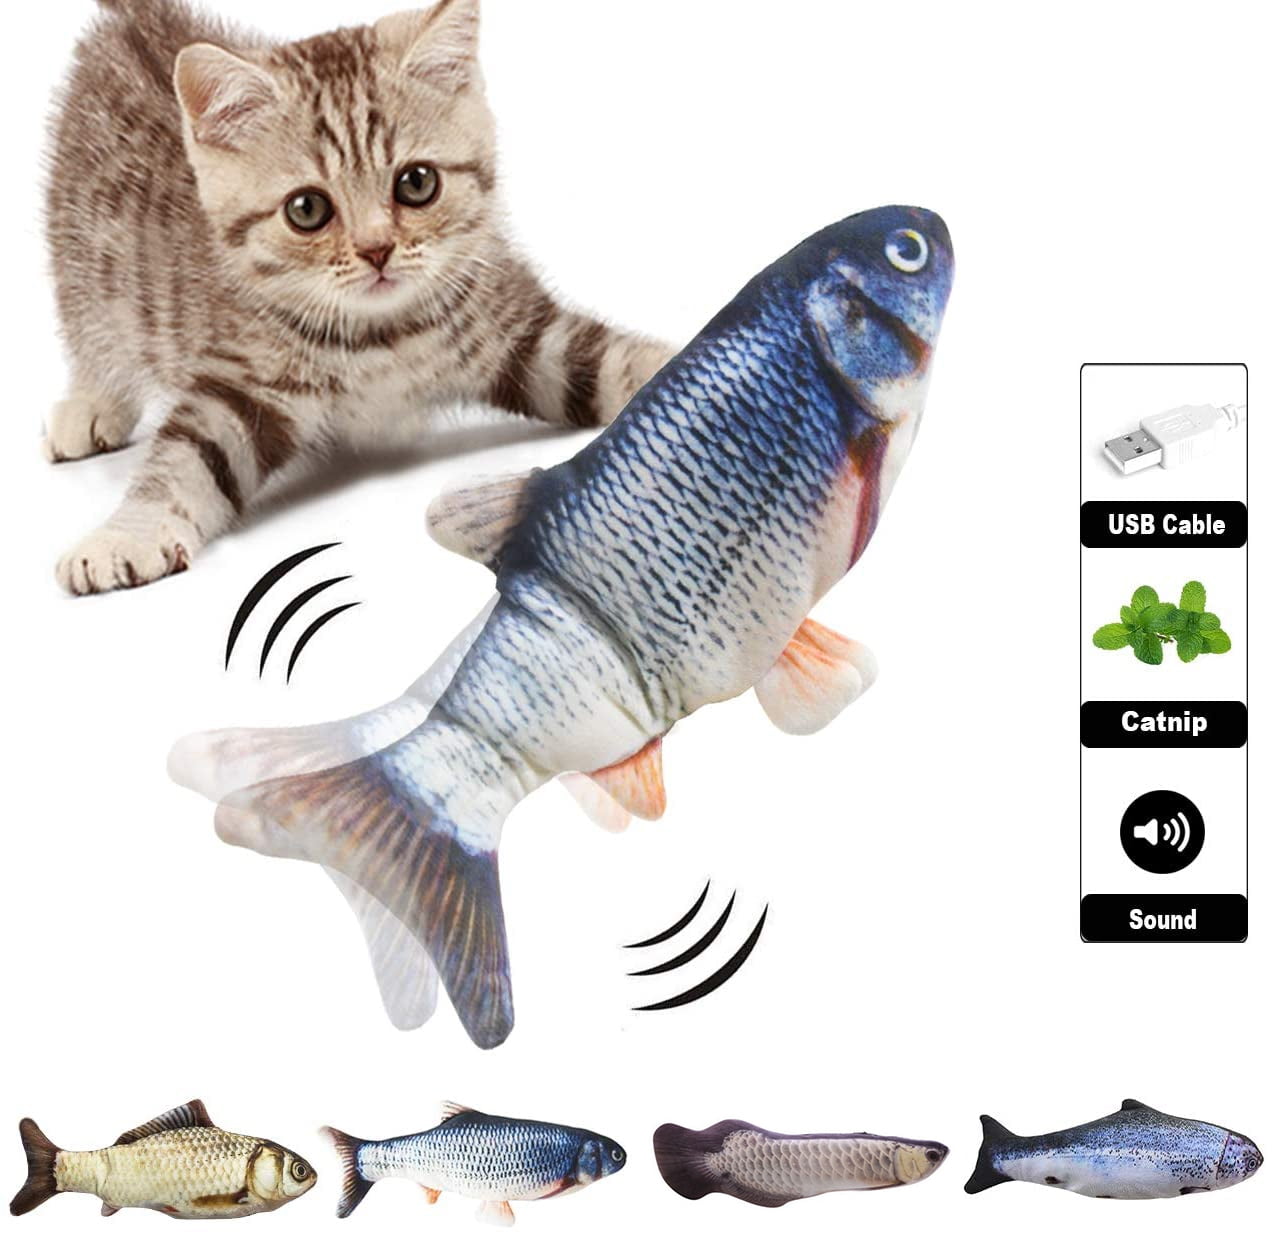 Catnip Kicker Toys Biting Chewing and Kicking Realistic Flopping Fish Fun Toy for Cat Exercise Plush Interactive Cat Toys Perfect Cat Gift for Grabbing Vovodog Electric Moving Fish Cat Toy